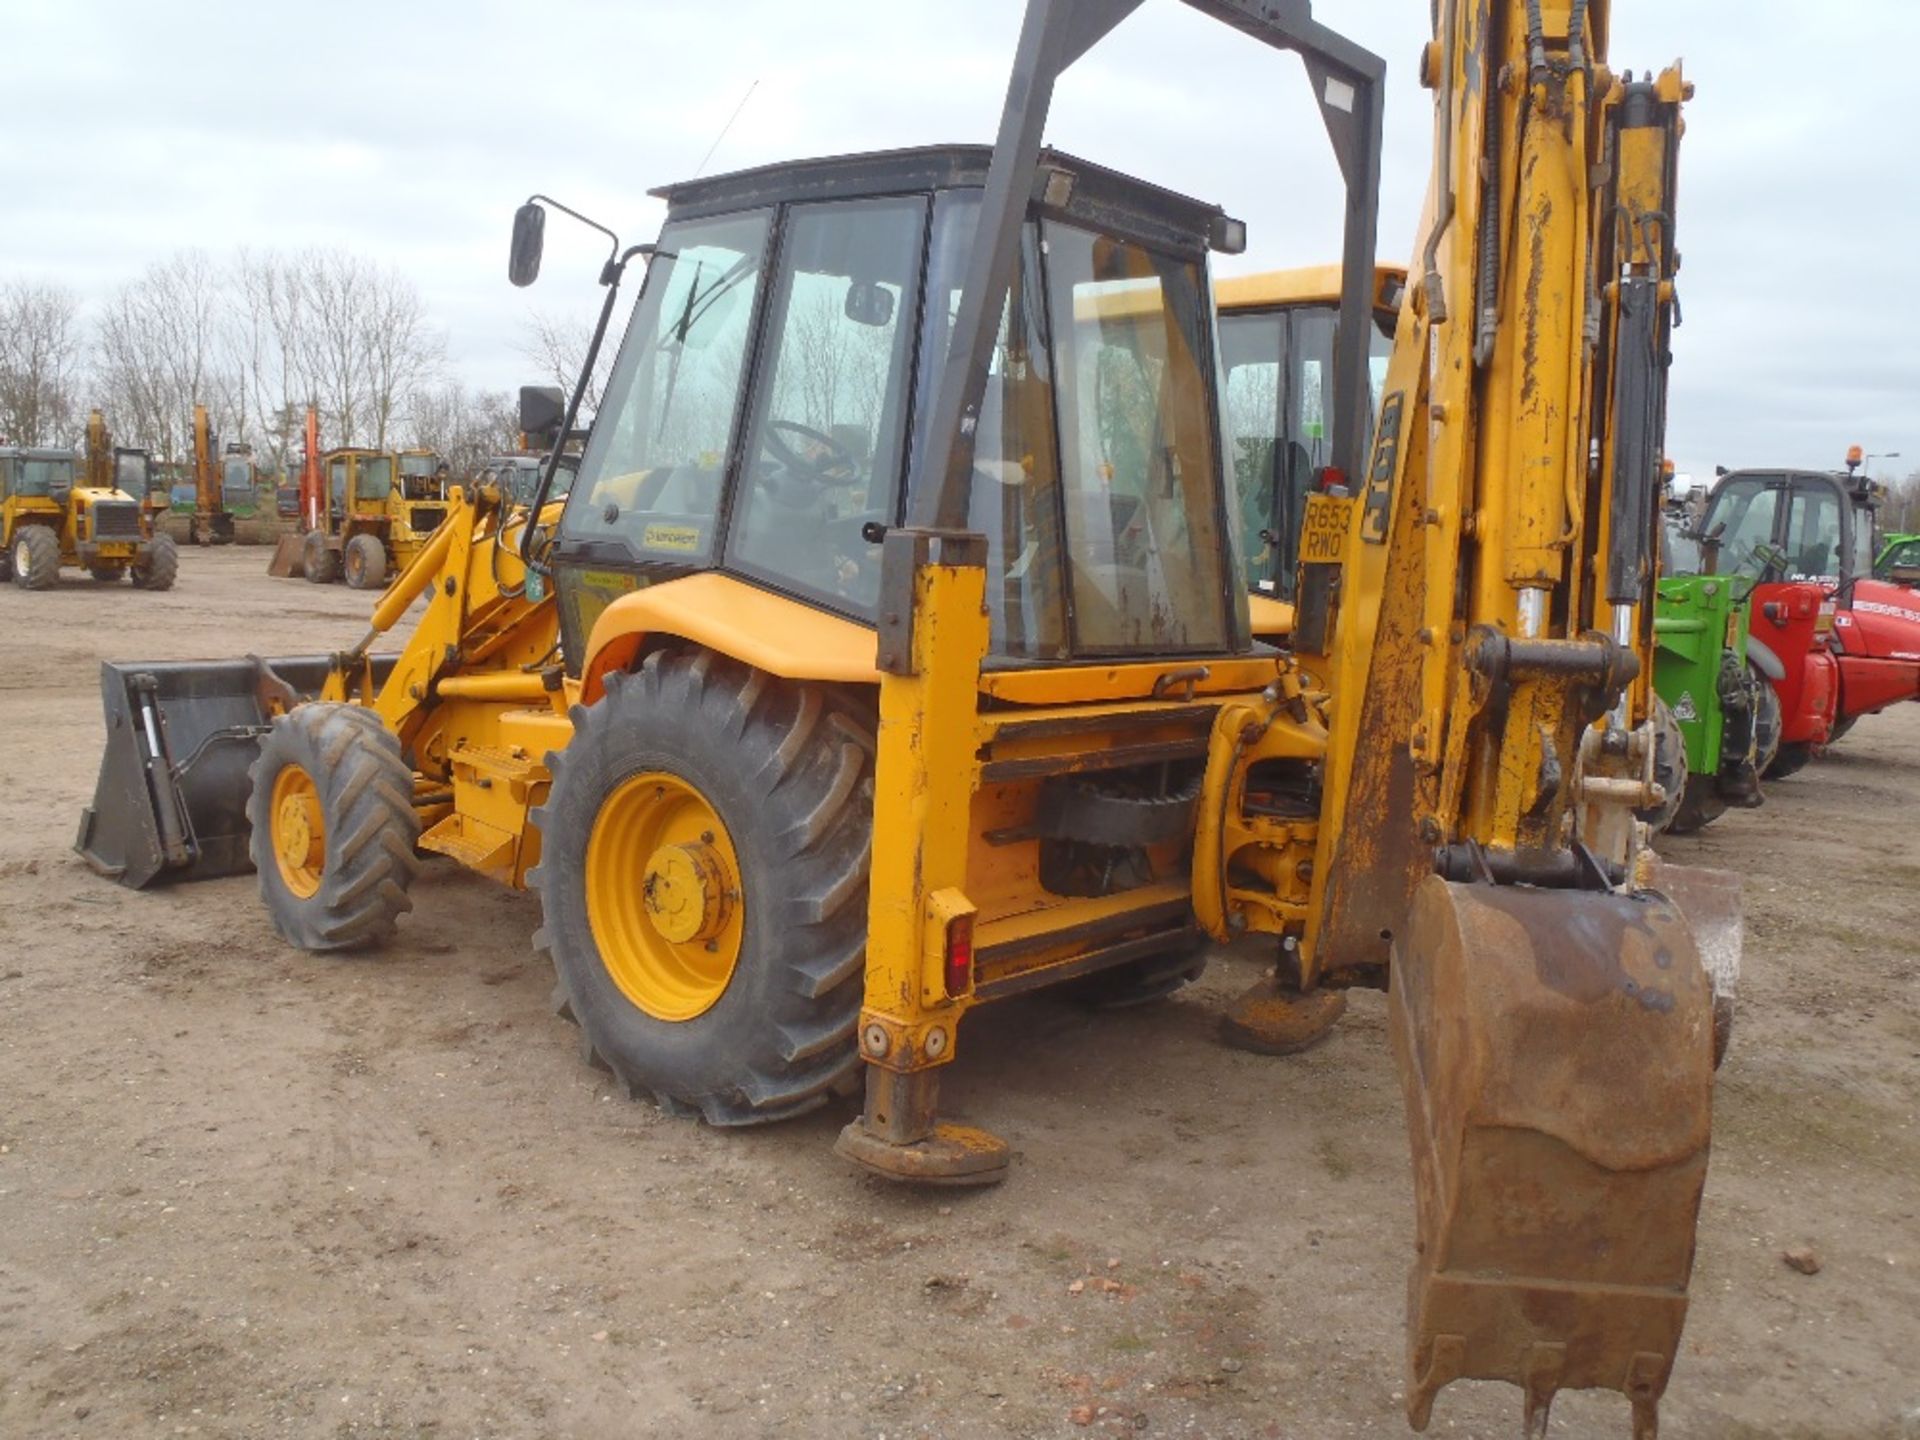 1998 JCB 3CX Manual Non Turbo With Pipework, Quick Fit Bucket. Hammer. V5 will be supplied. Ex - Image 8 of 8